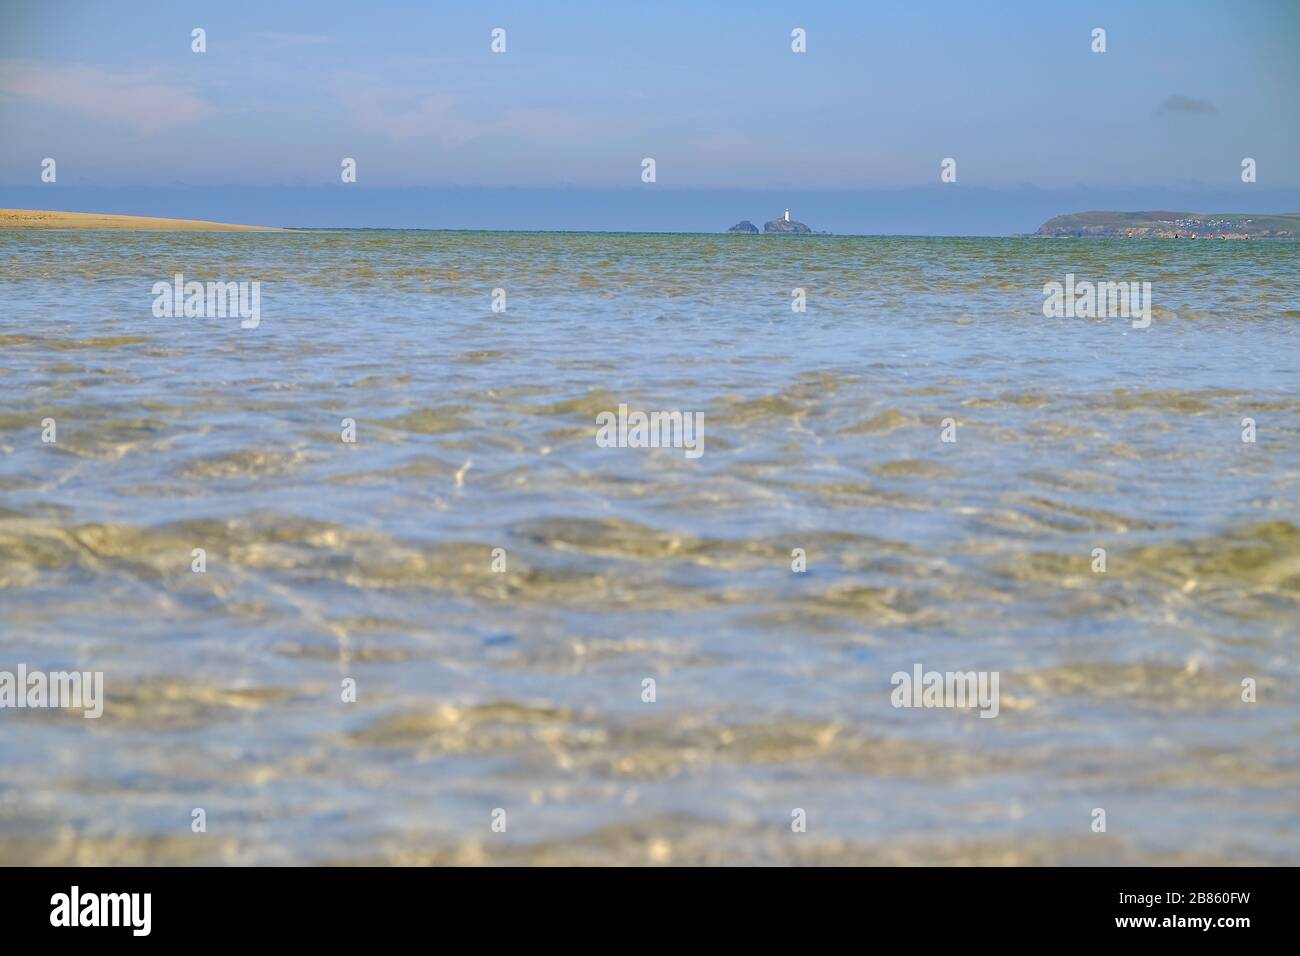 Low shot of rippling green blue sea in the foreground with sandy beach and lighthouse in the background Stock Photo